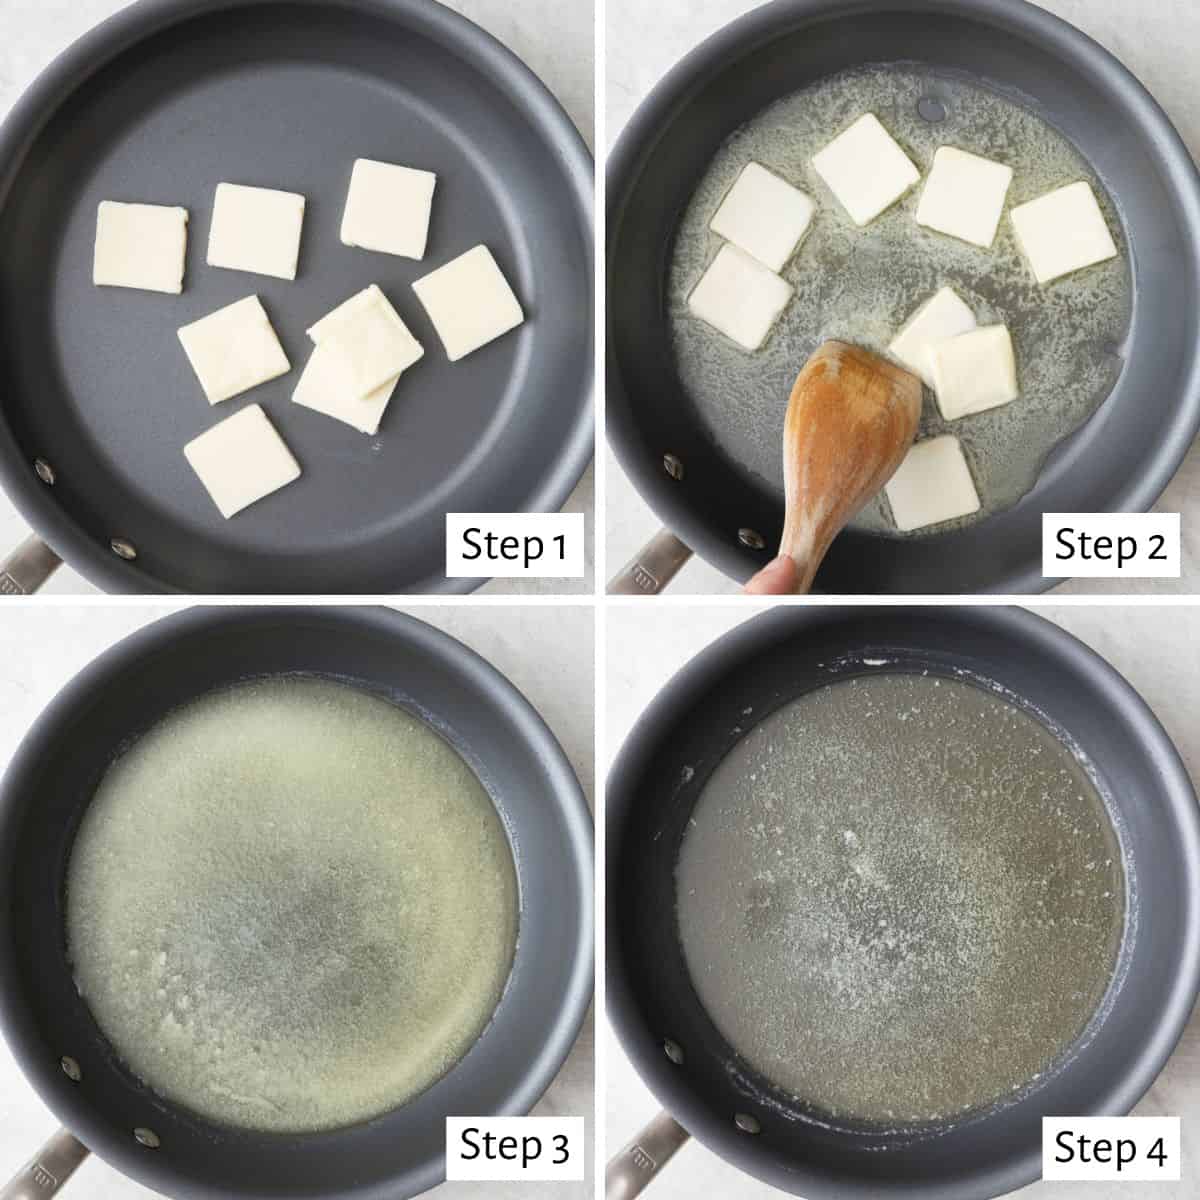 4 image collage of recipe tutorial: 1- sliced butter in a skillet, 2- wooden spoon stirring with some partially melted, 3- butter after melting with solids, 4- butter after fully melting.